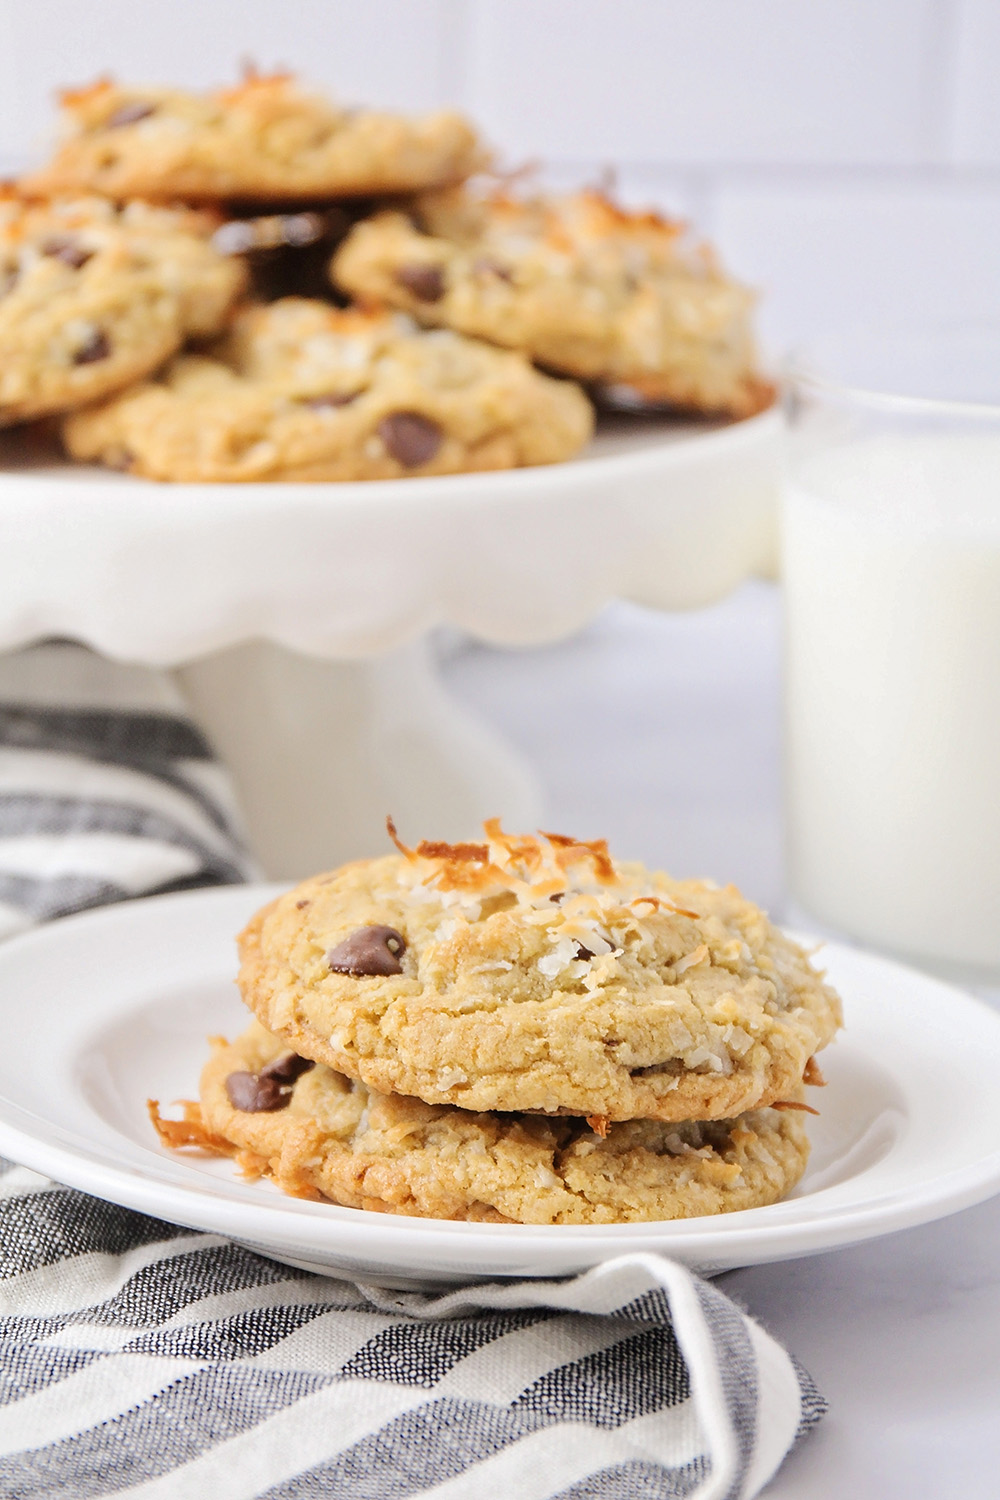 These chewy coconut chocolate chip cookies taste heavenly, and are loaded with gooey chocolate and sweet coconut!